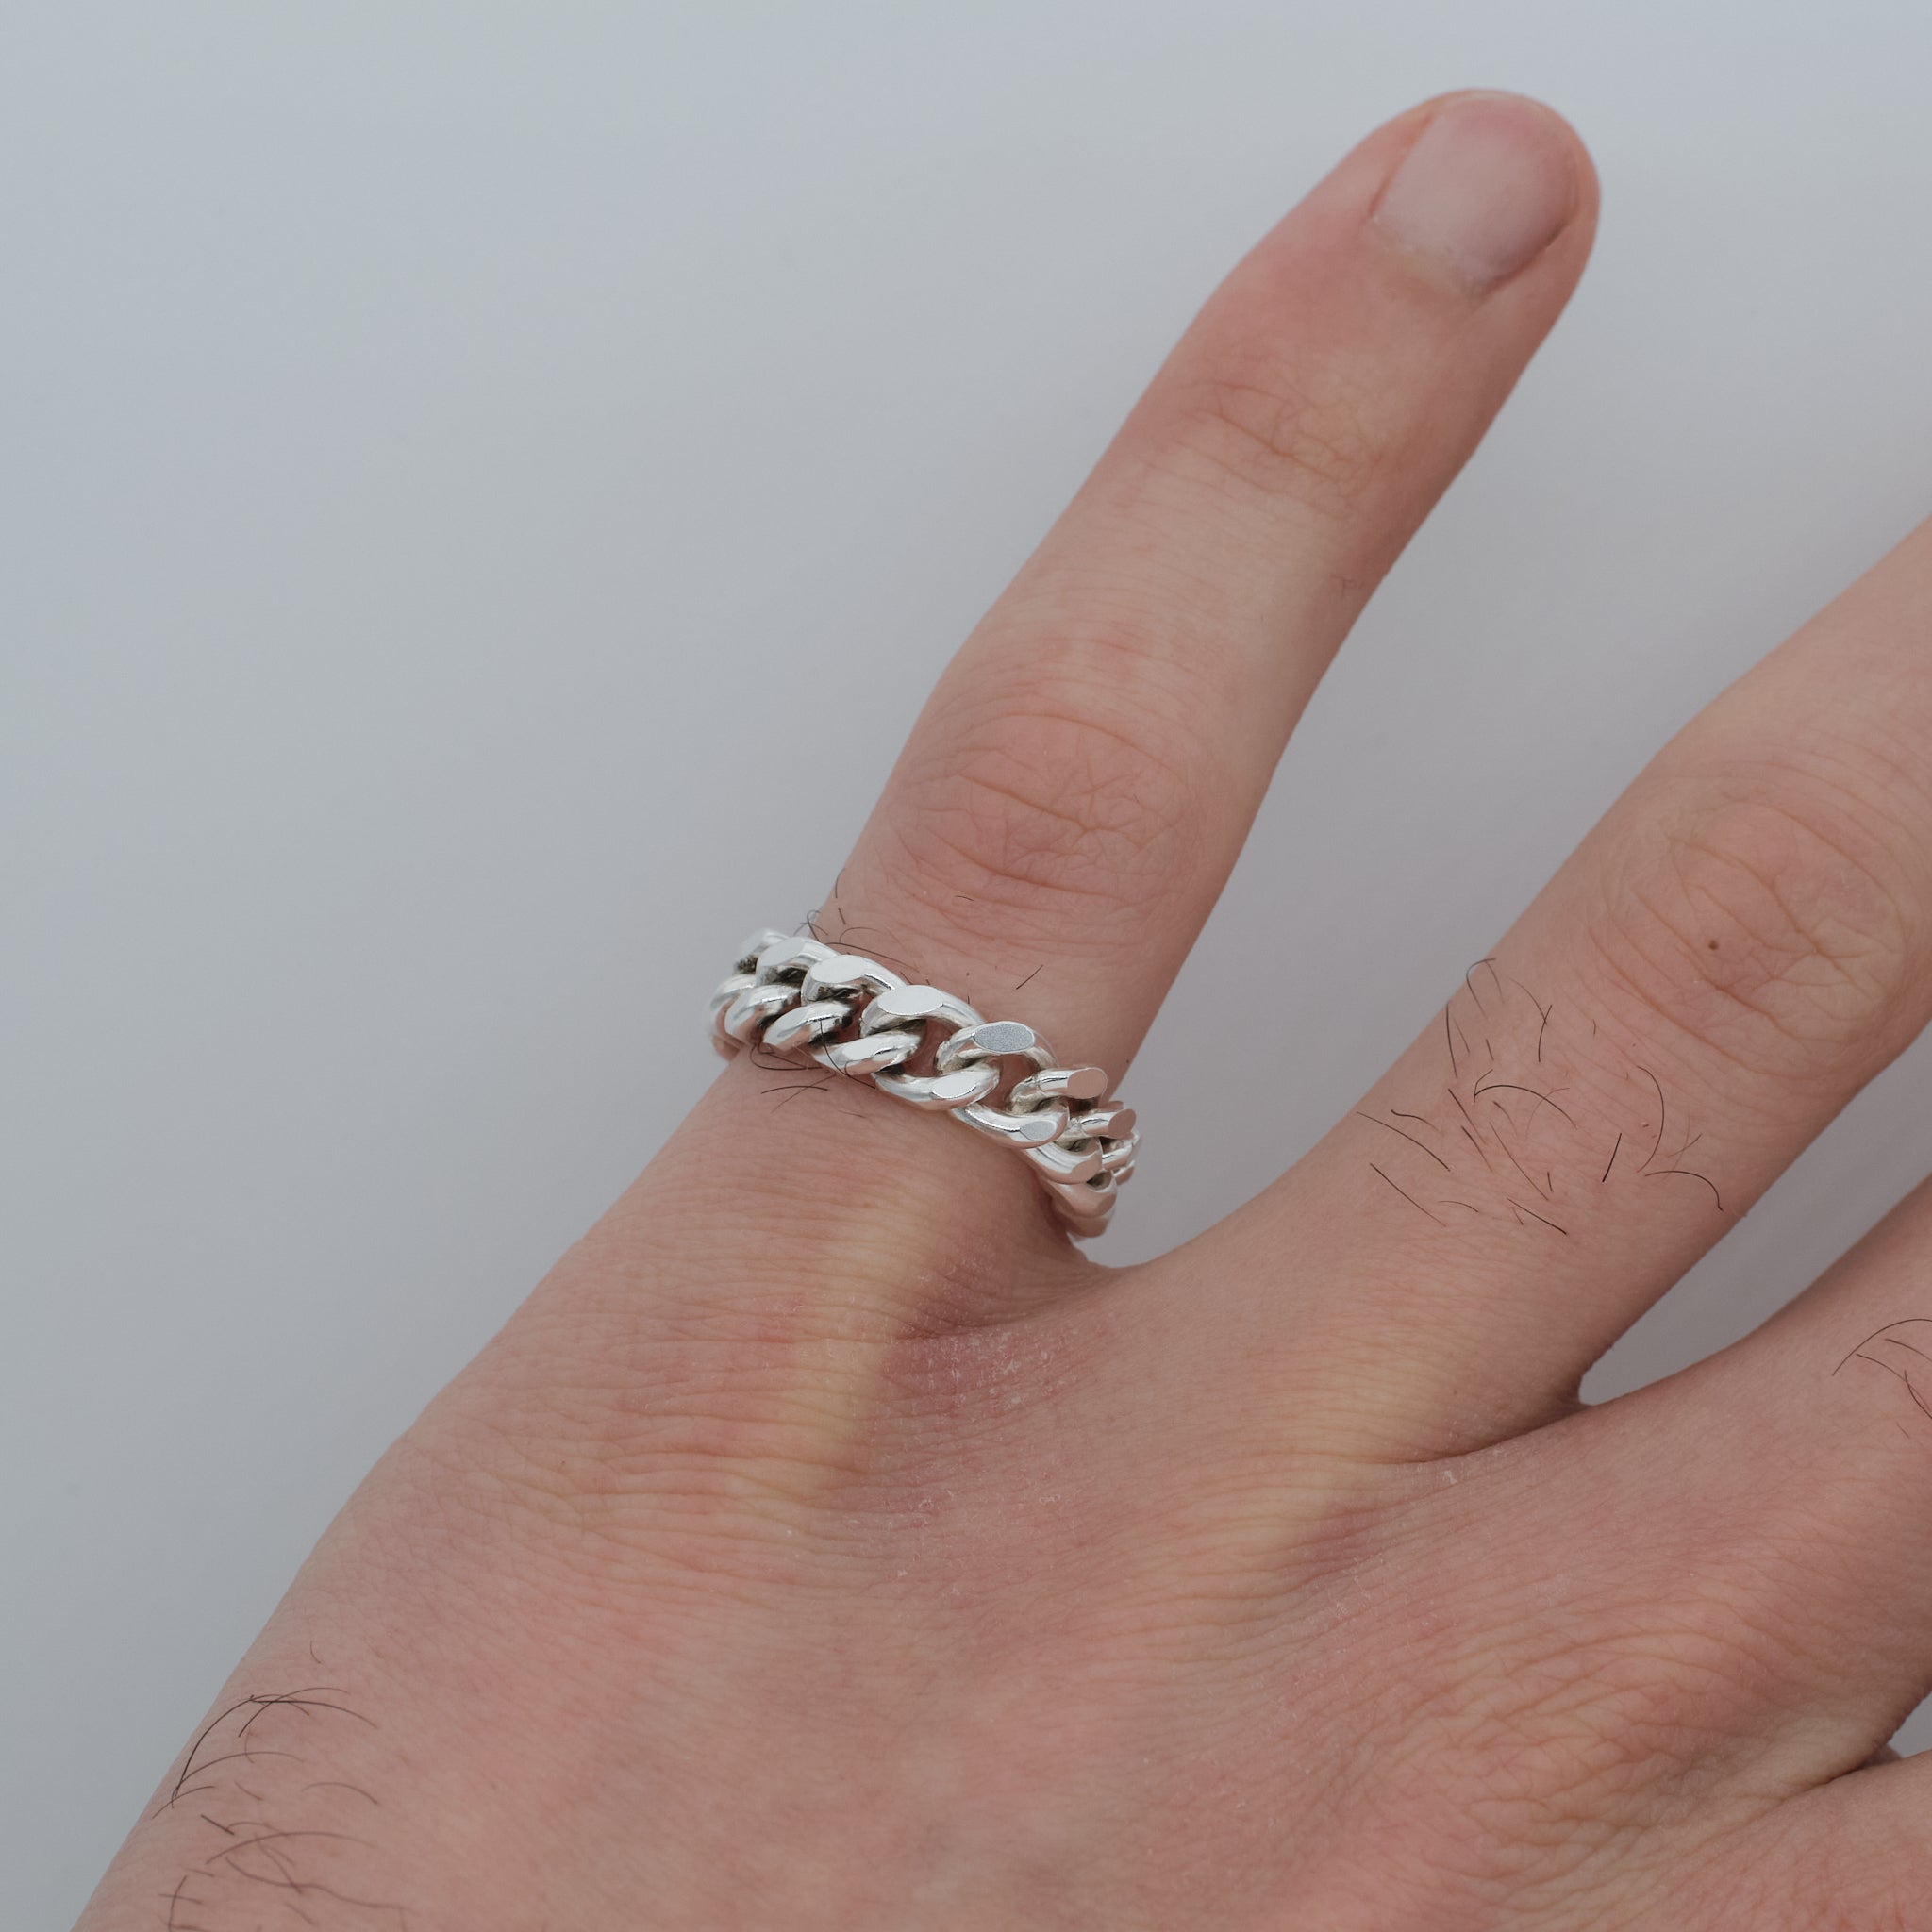 The Chain Ring – 925 Sterling Silver